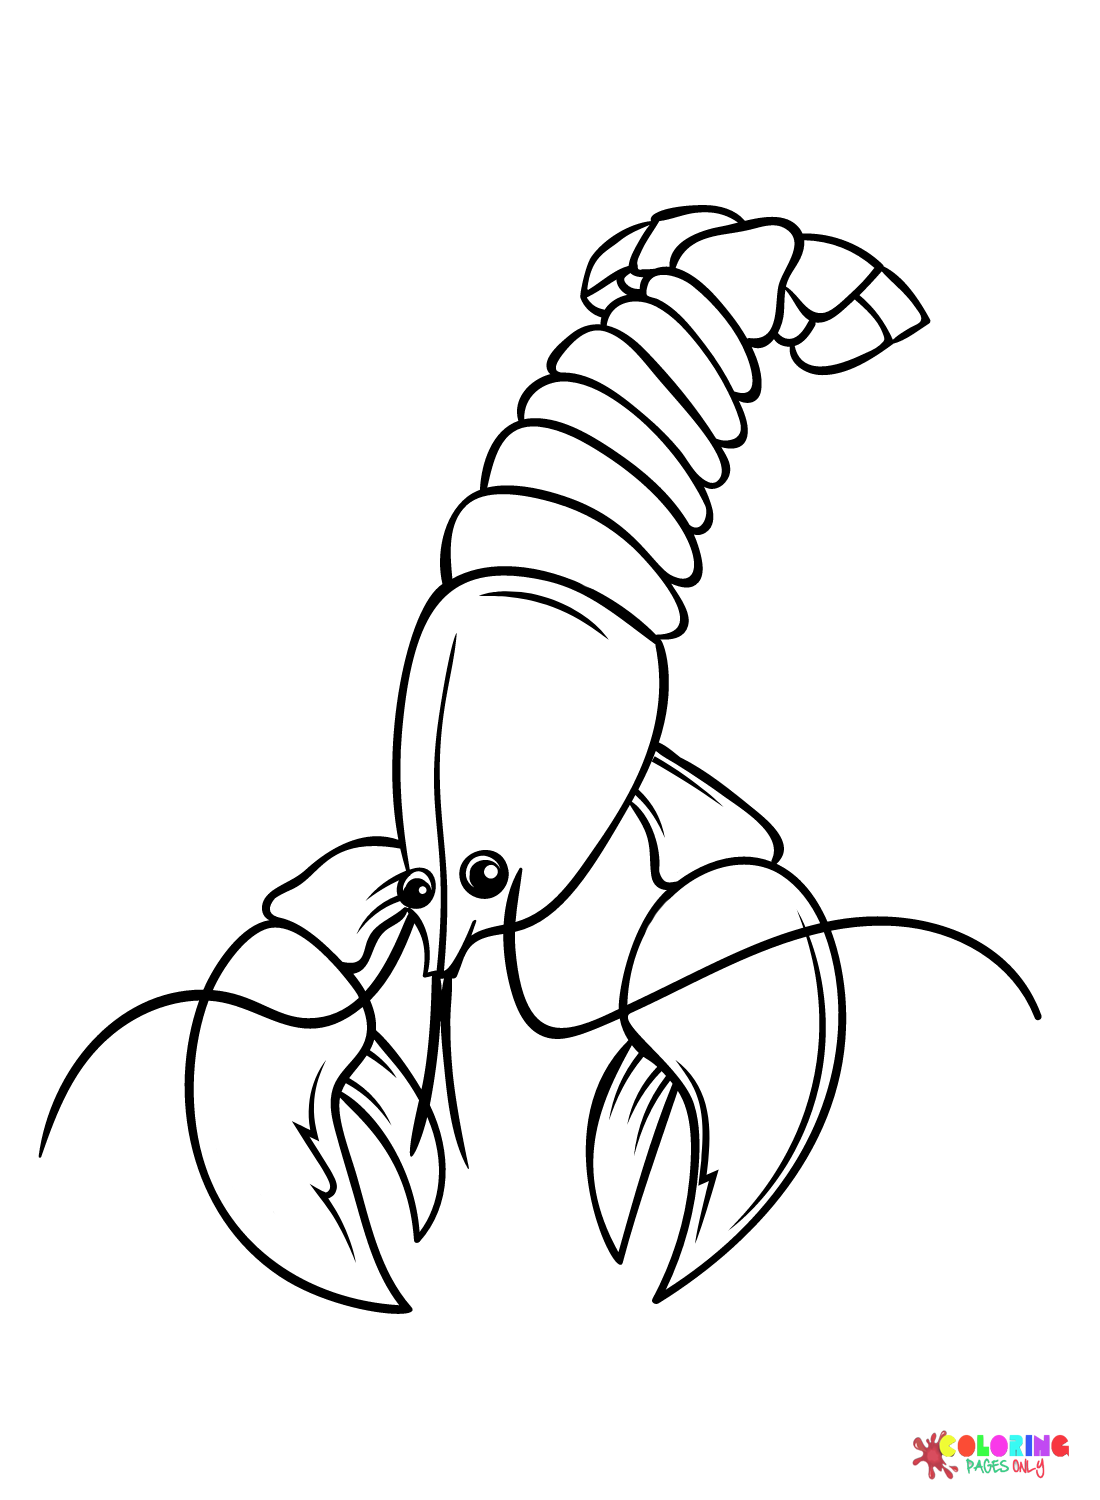 Lobster Flat Coloring Page